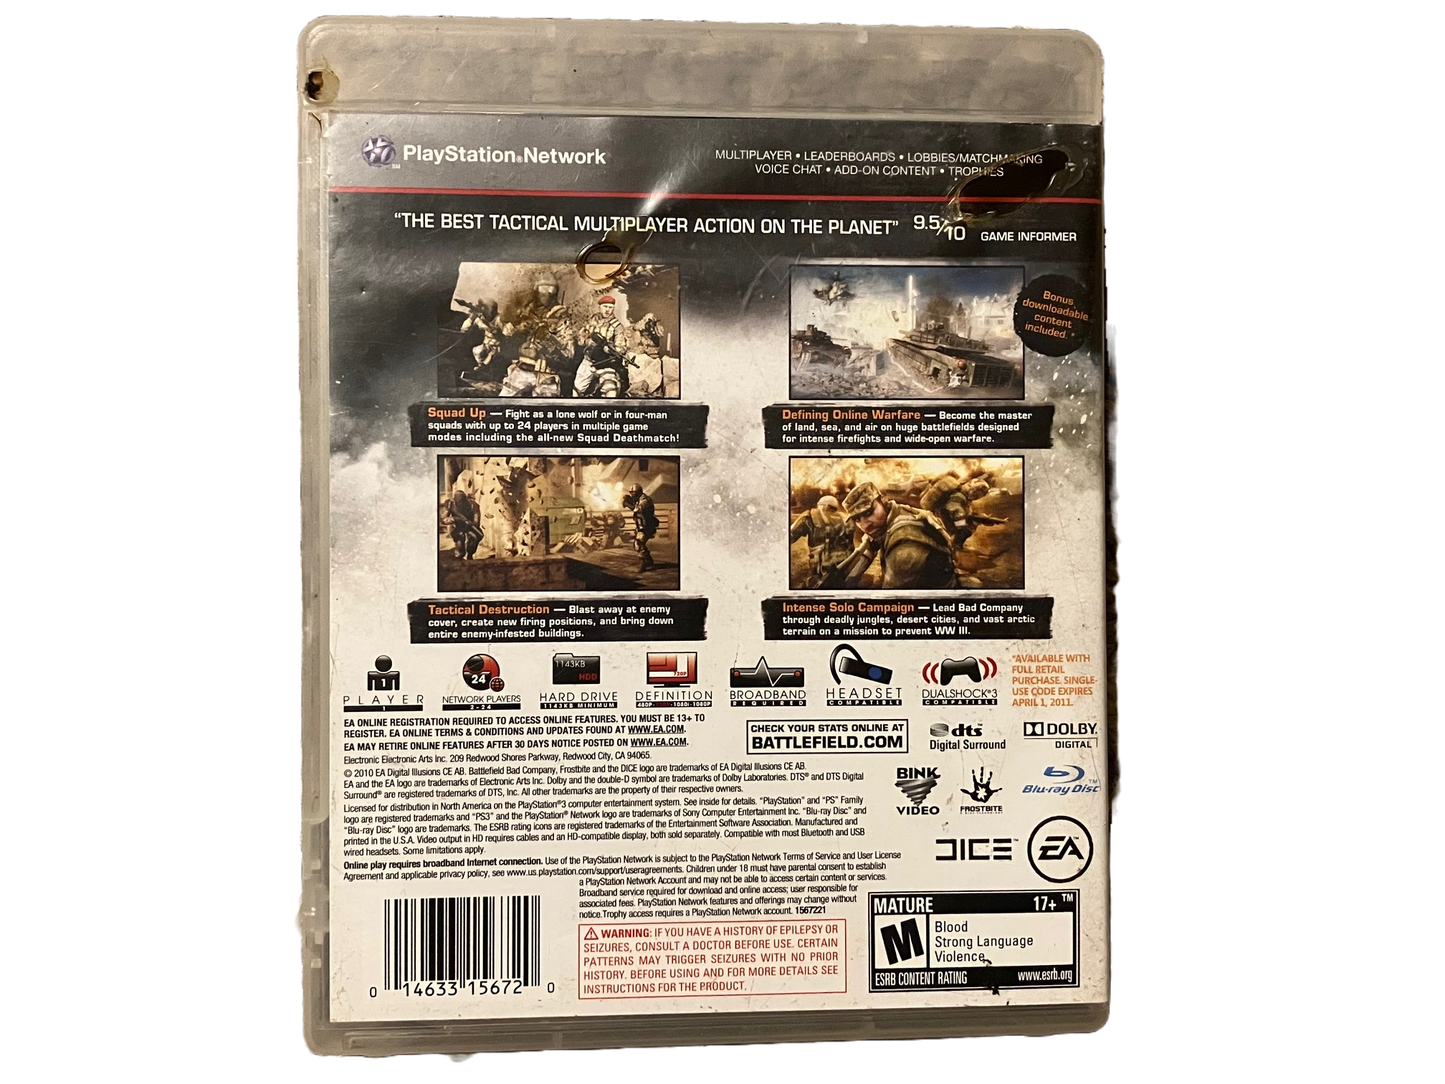 Battlefield Bad Company 2 Sony PlayStation 3 PS3 Complete